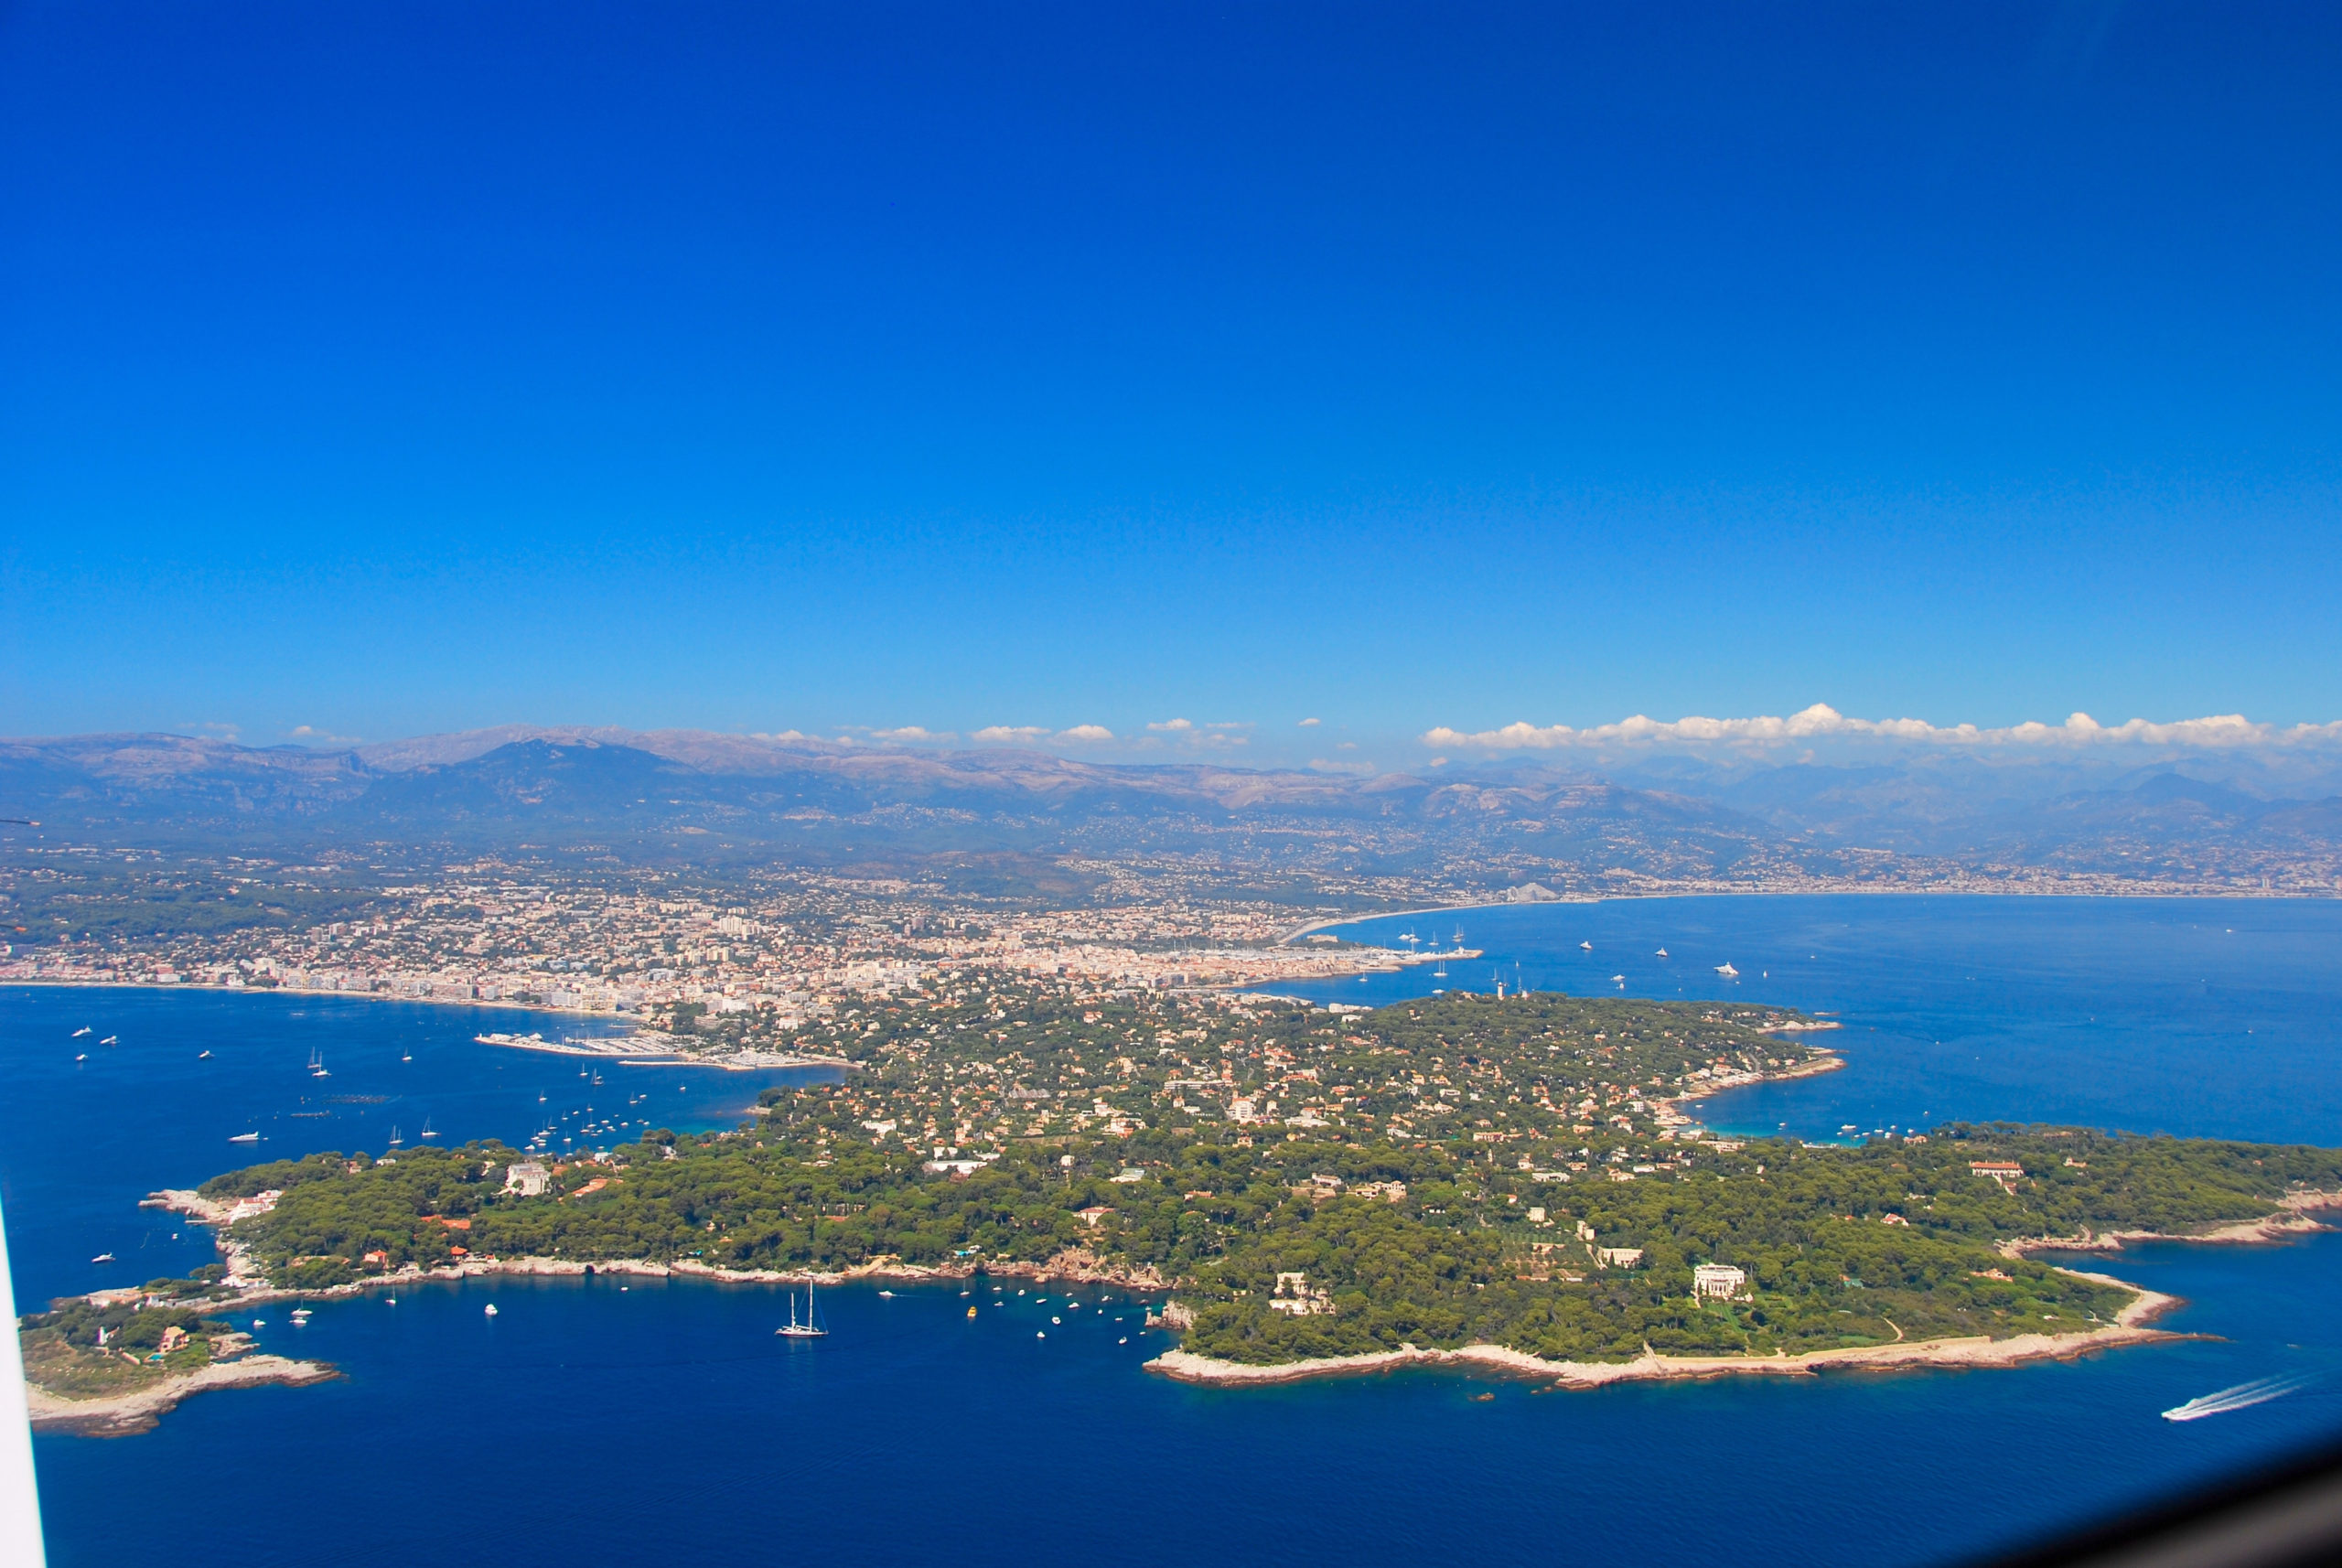 View of the French Riviera by plane